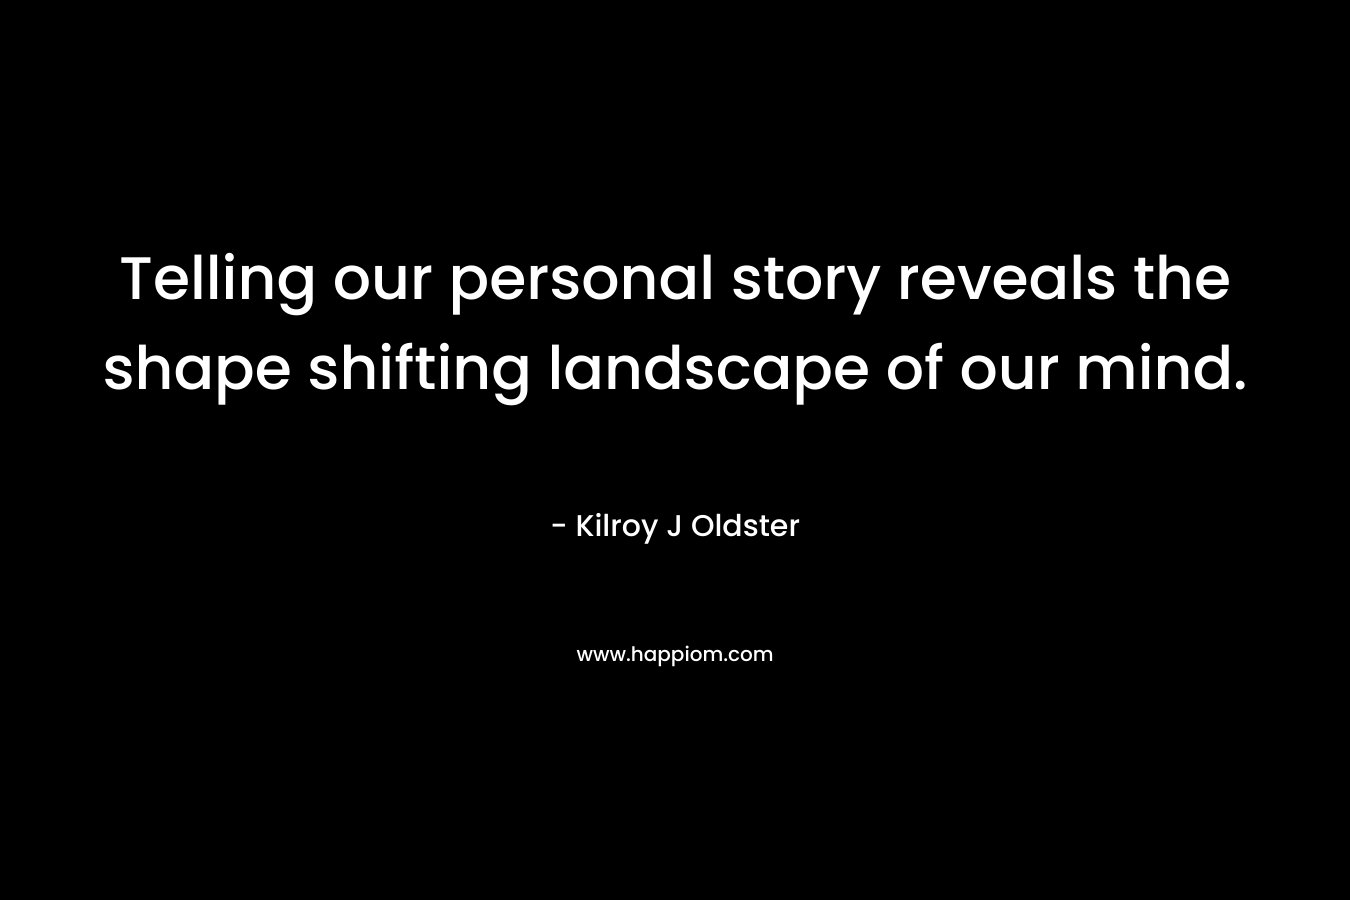 Telling our personal story reveals the shape shifting landscape of our mind. – Kilroy J Oldster